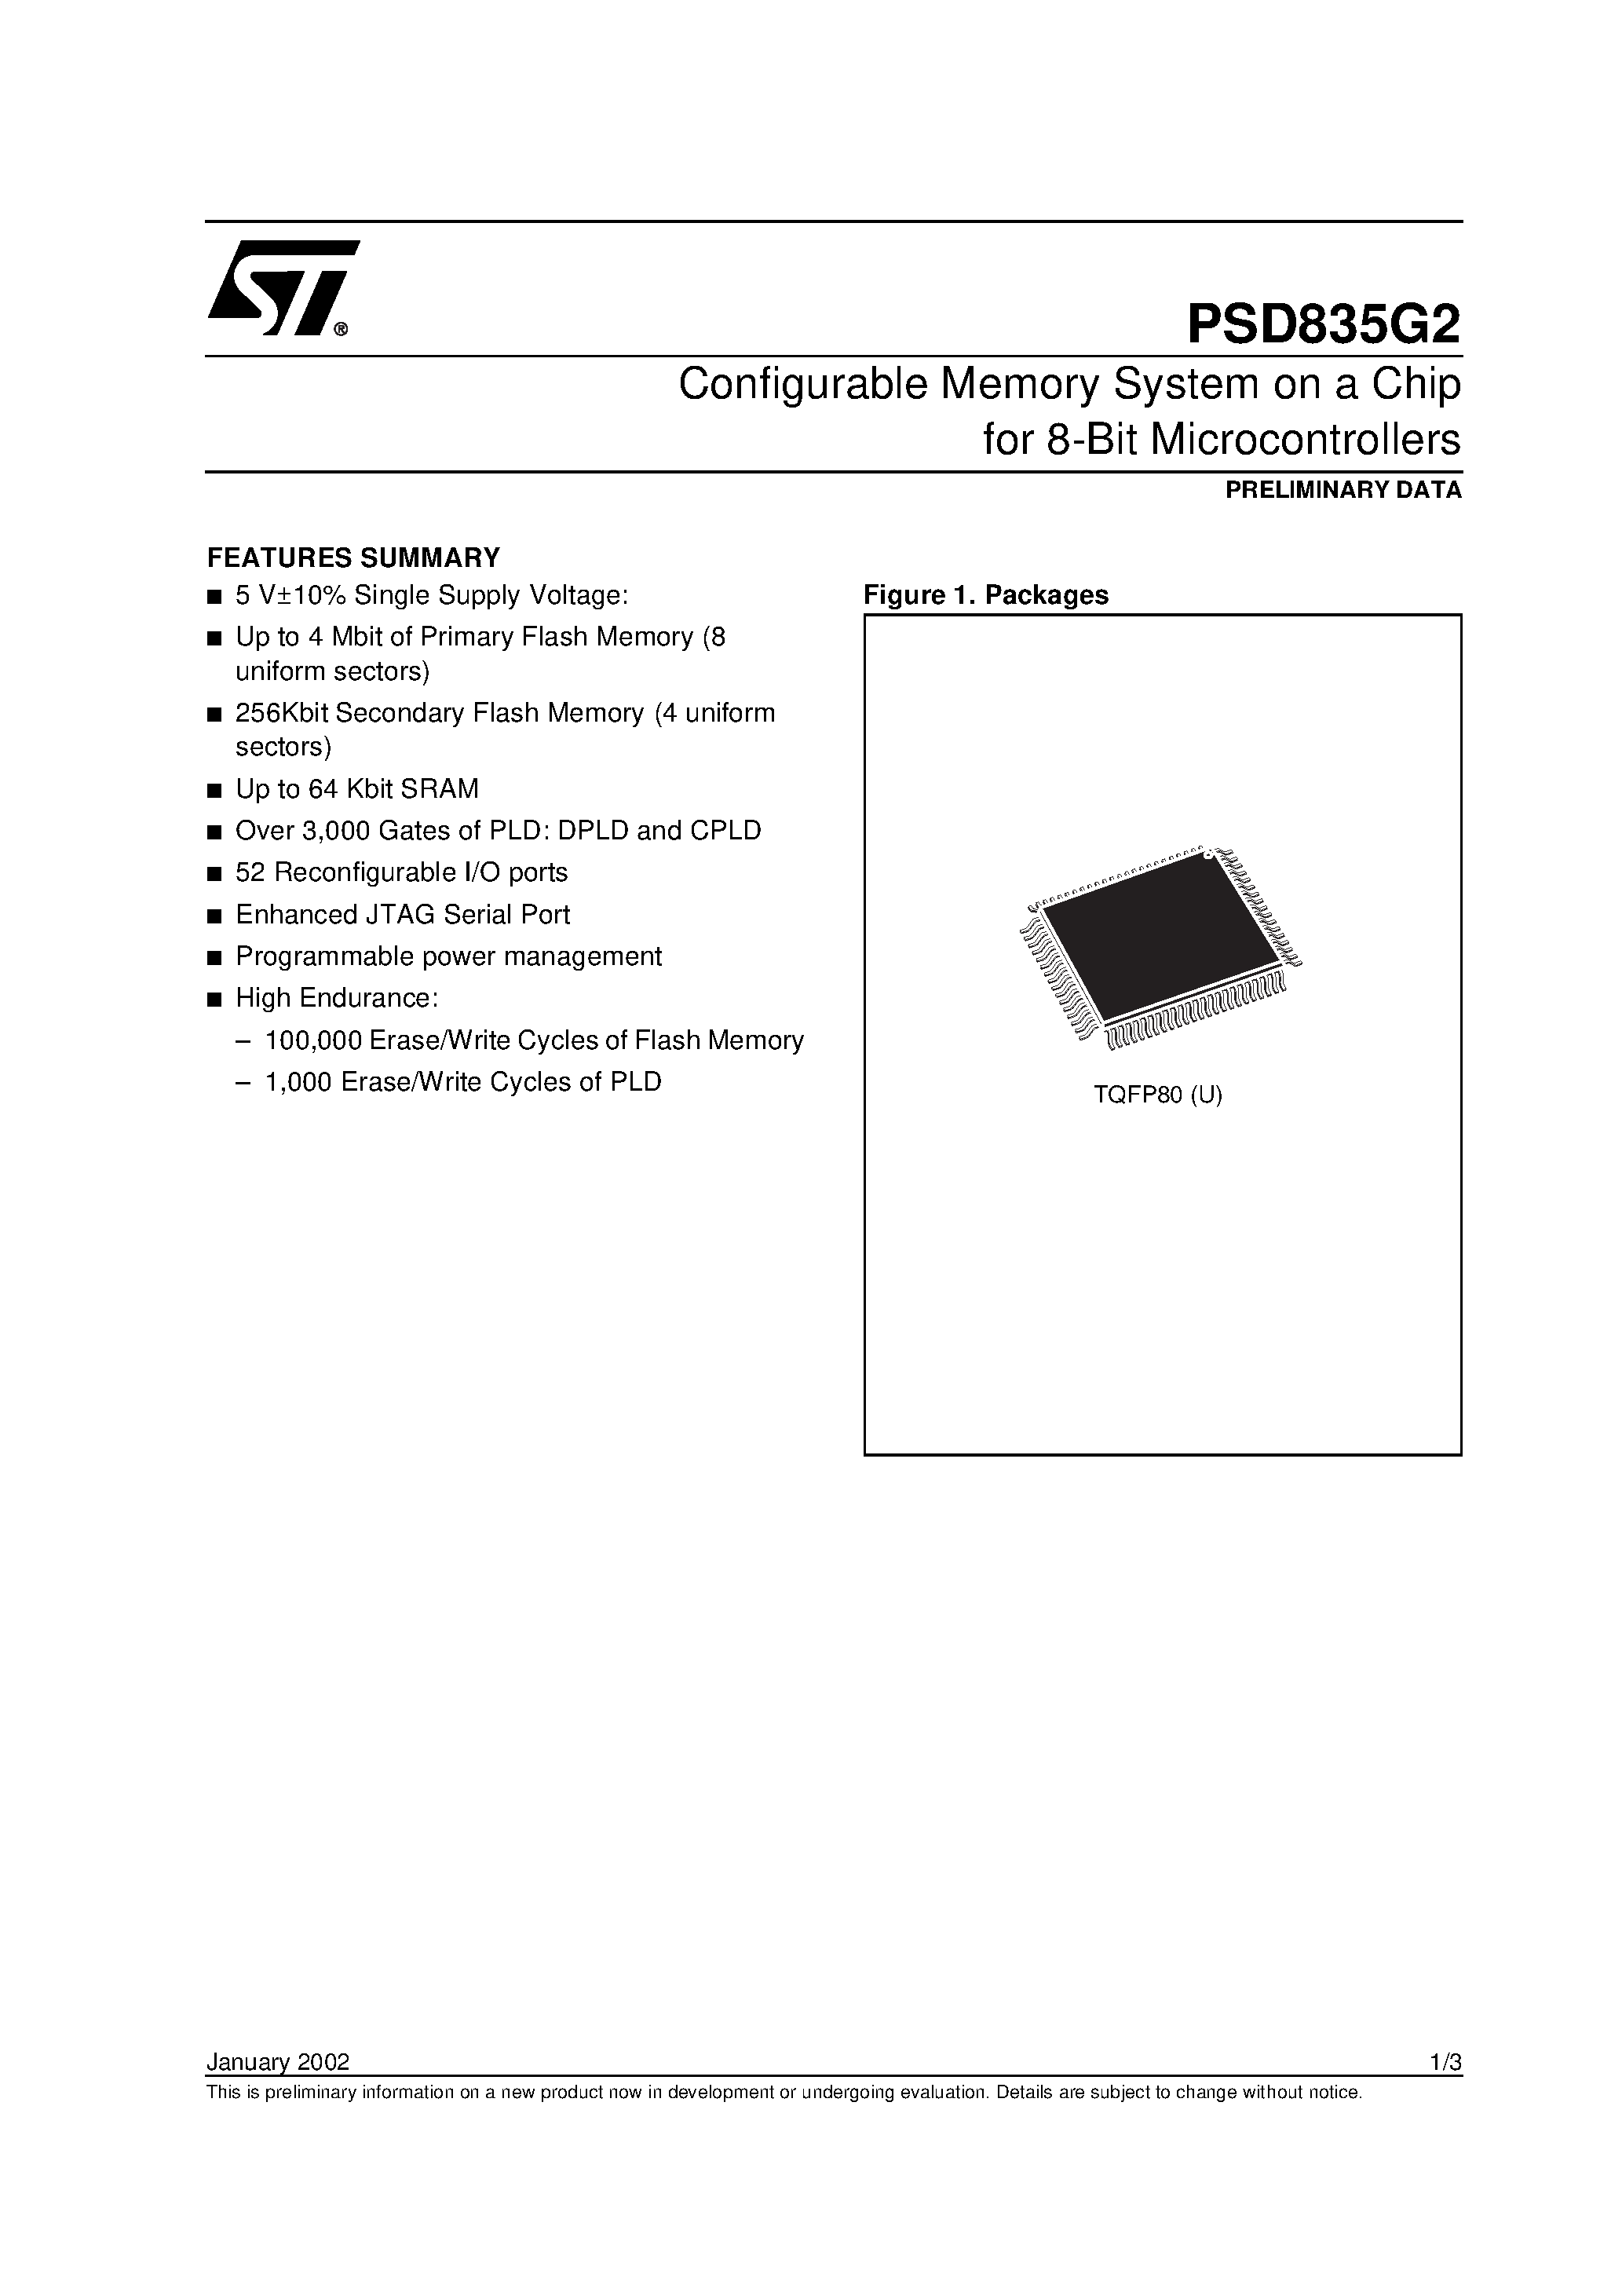 Datasheet PSD835F1-A-70U - Configurable Memory System on a Chip for 8-Bit Microcontrollers page 1